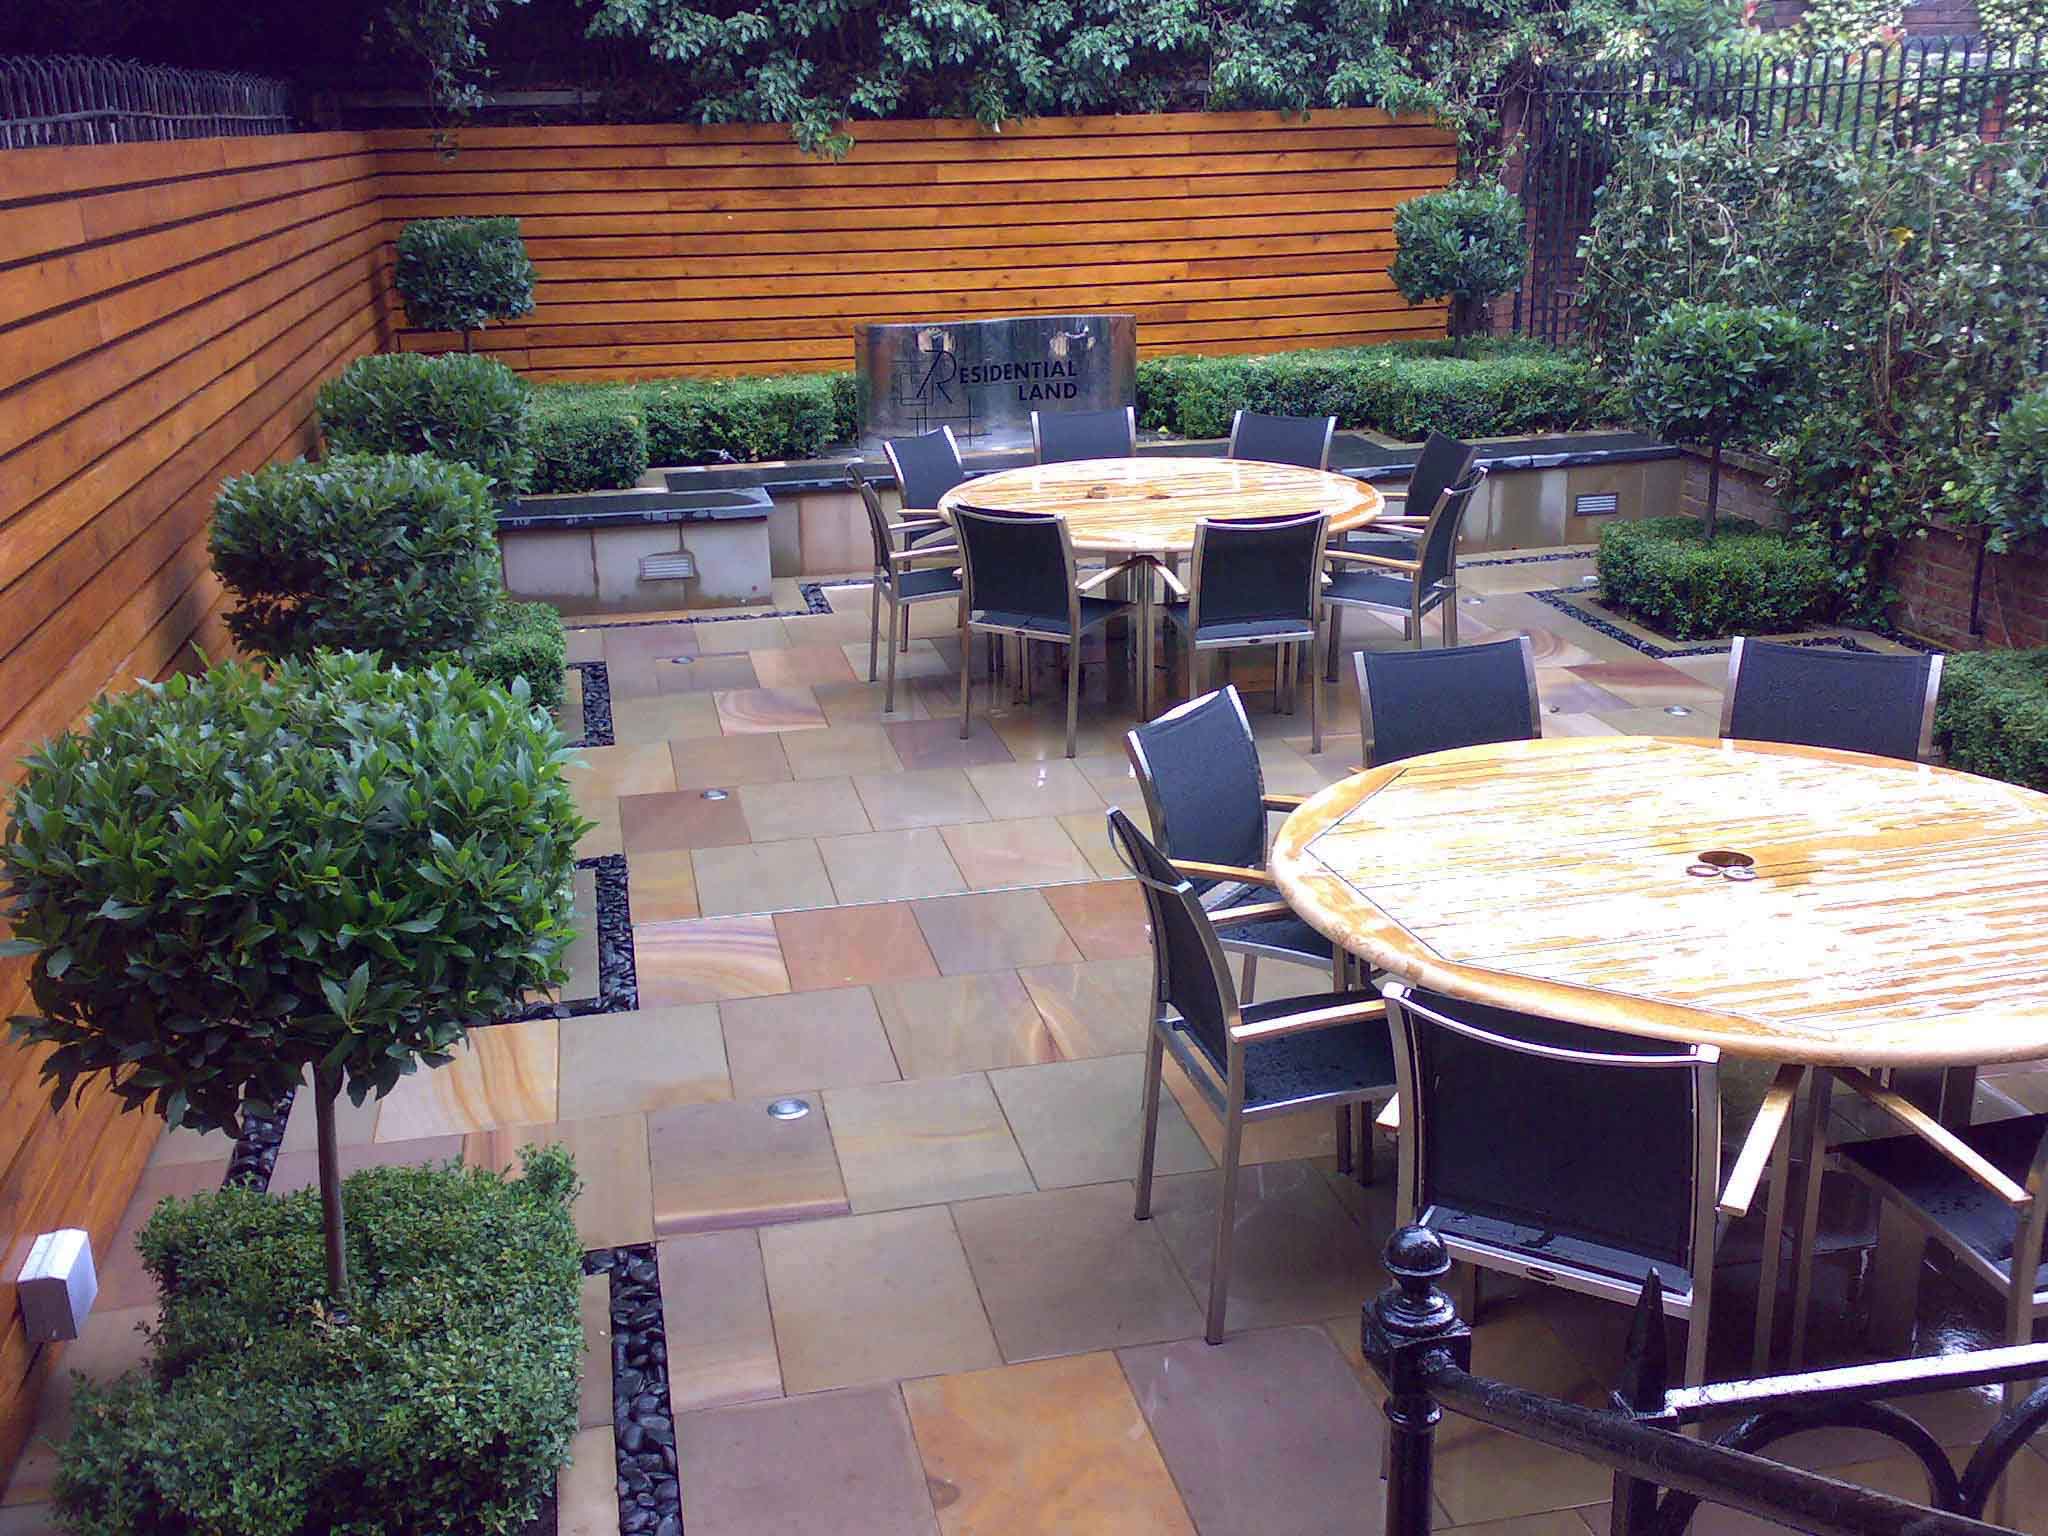 Office staff garden courtyard with table chairs and modern furnishings and clipped bay trees